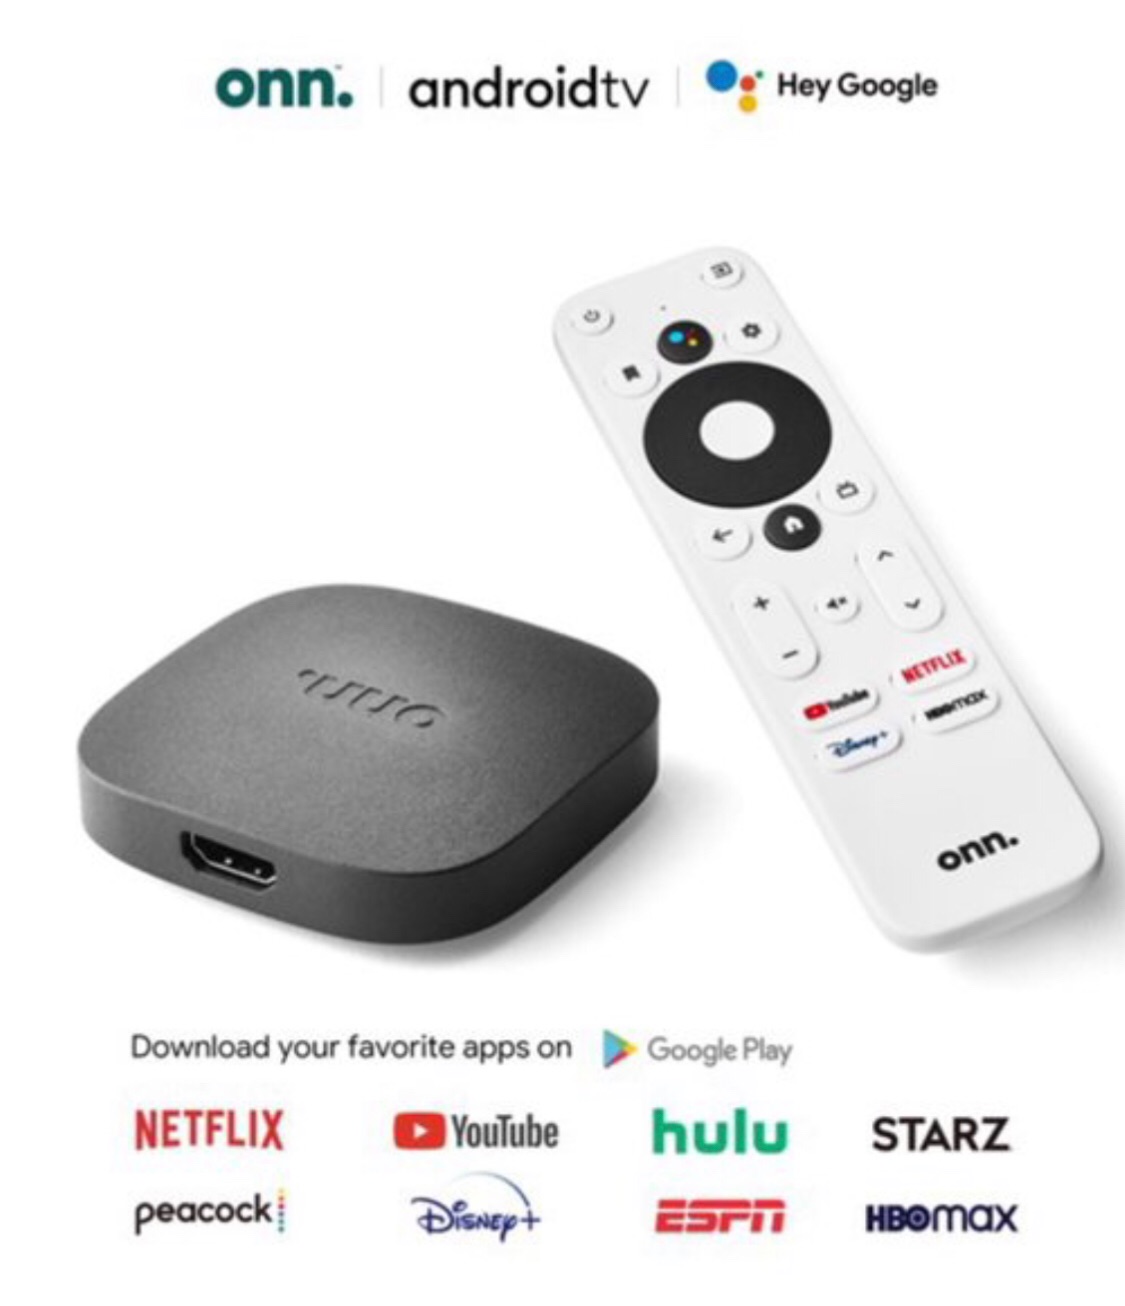 onn android tv